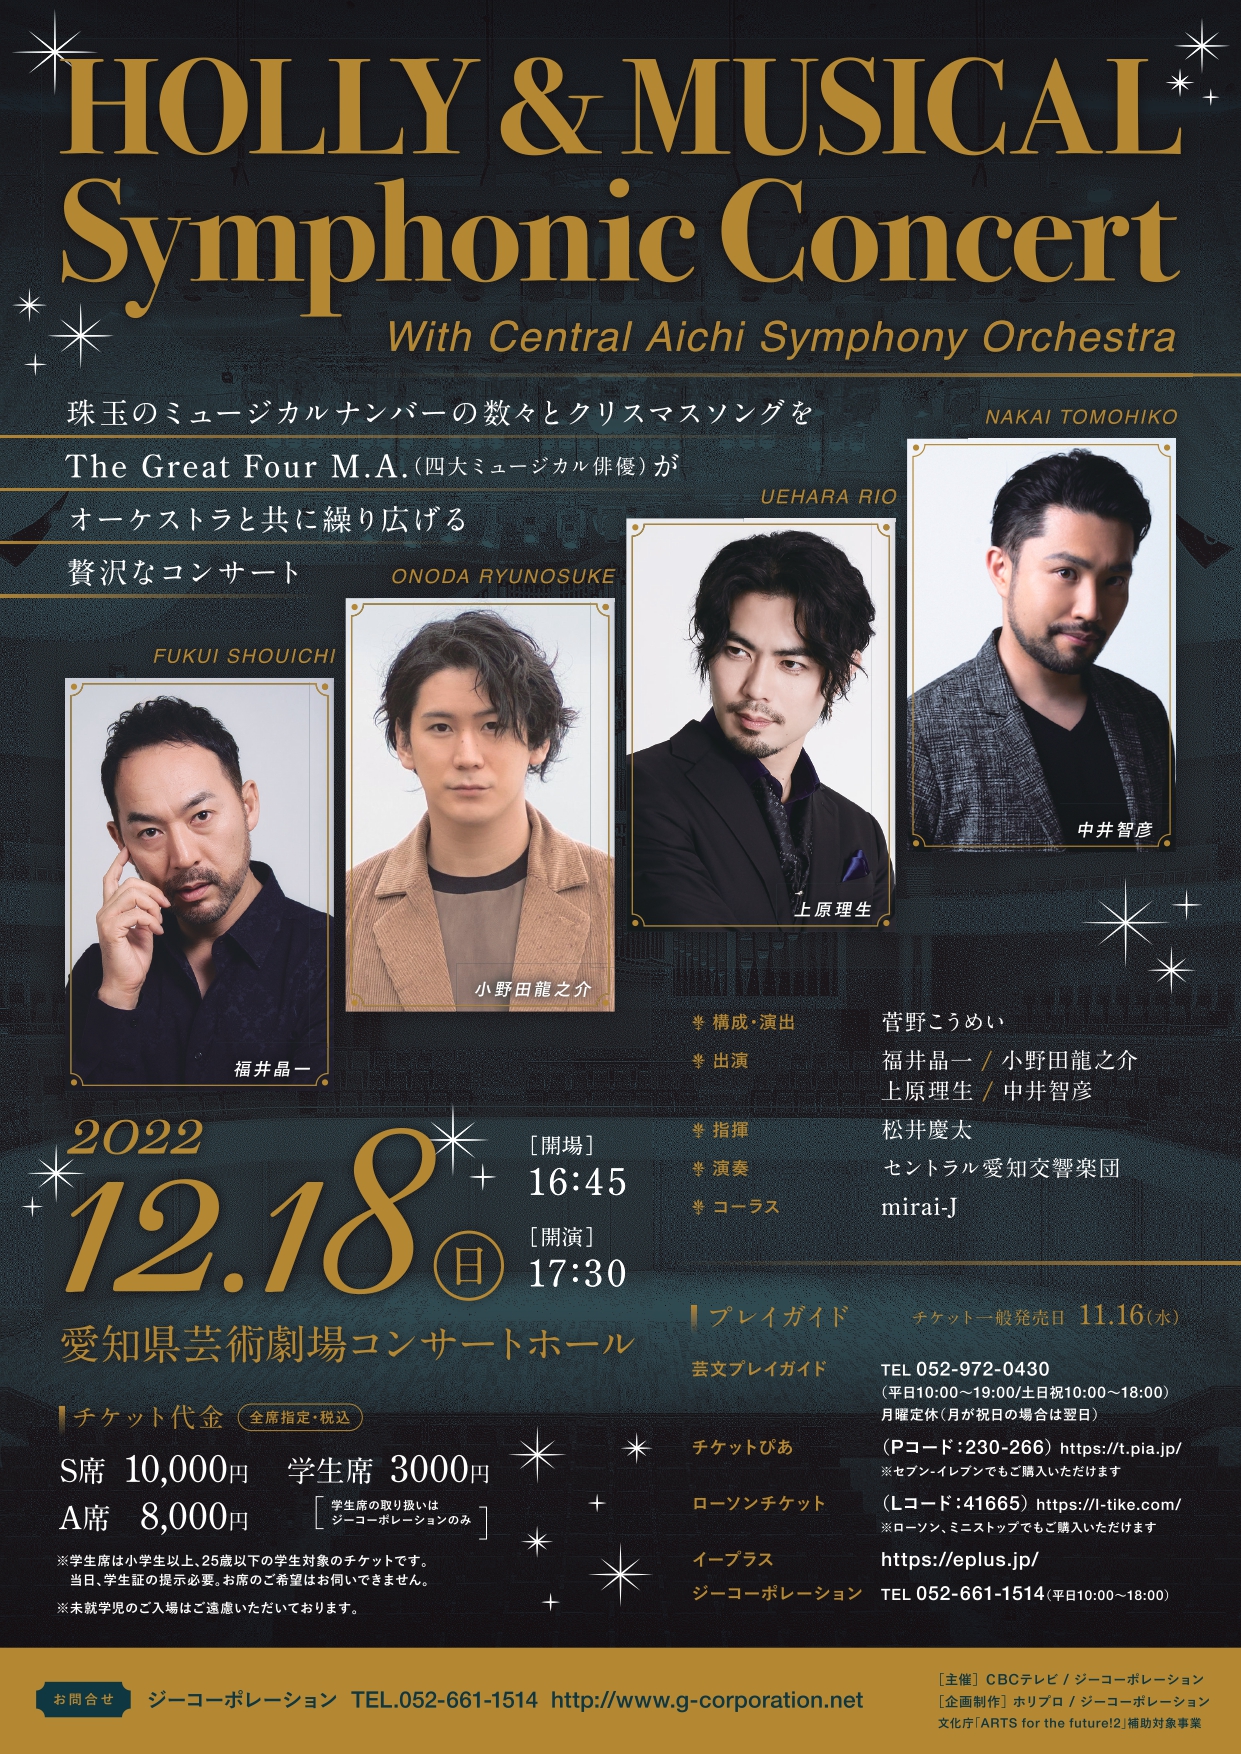 HOLLY & MUSICAL Symphonic Concert With Central Aichi Symphony Orchestra